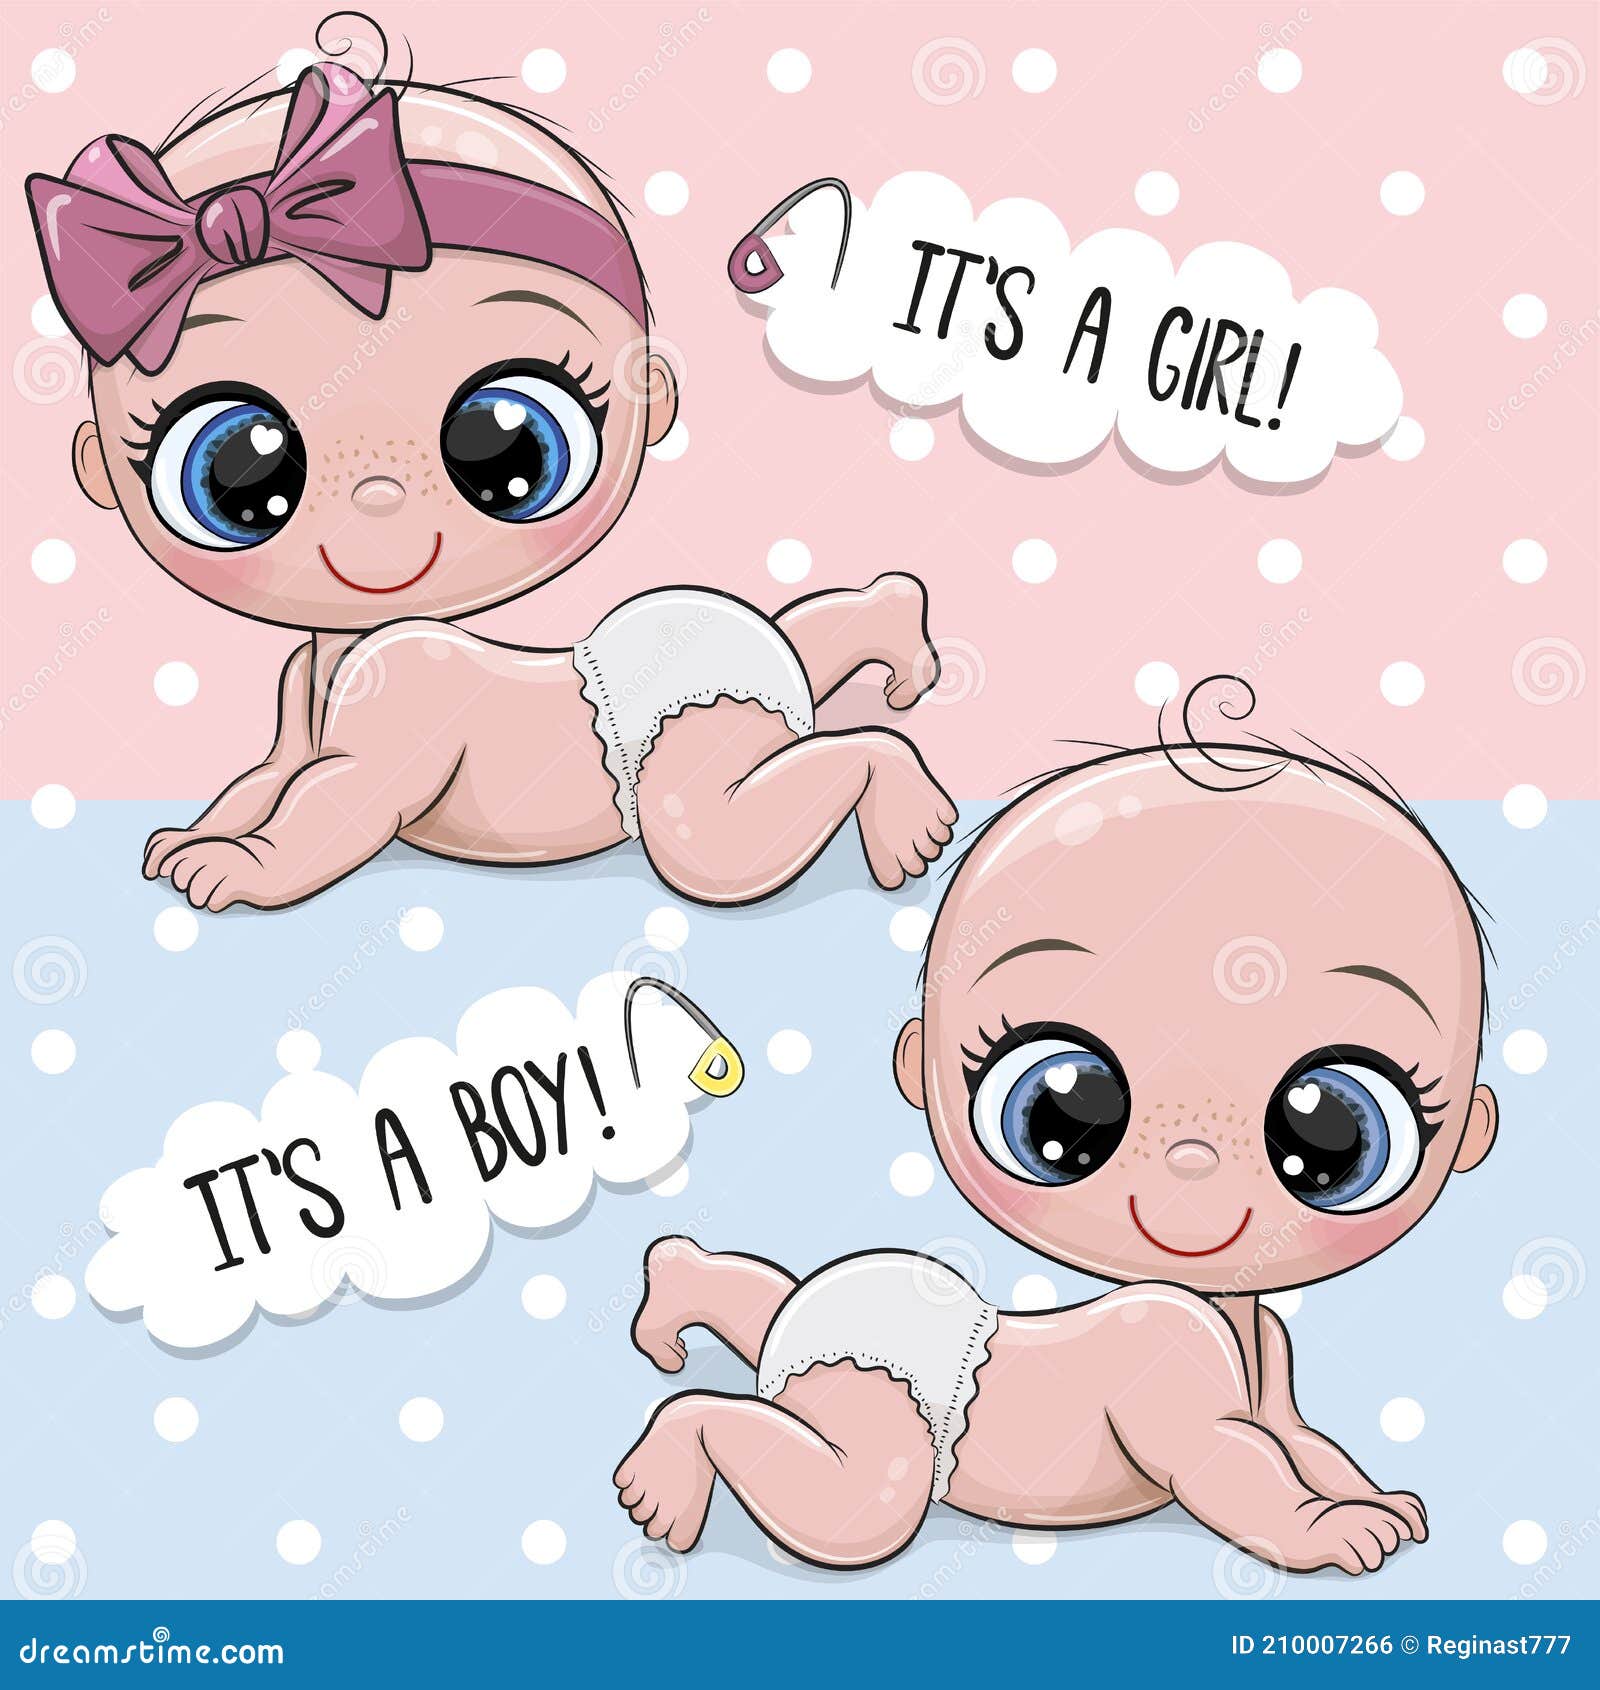 Cute Babies boy and girl stock vector. Illustration of birth - 210007266